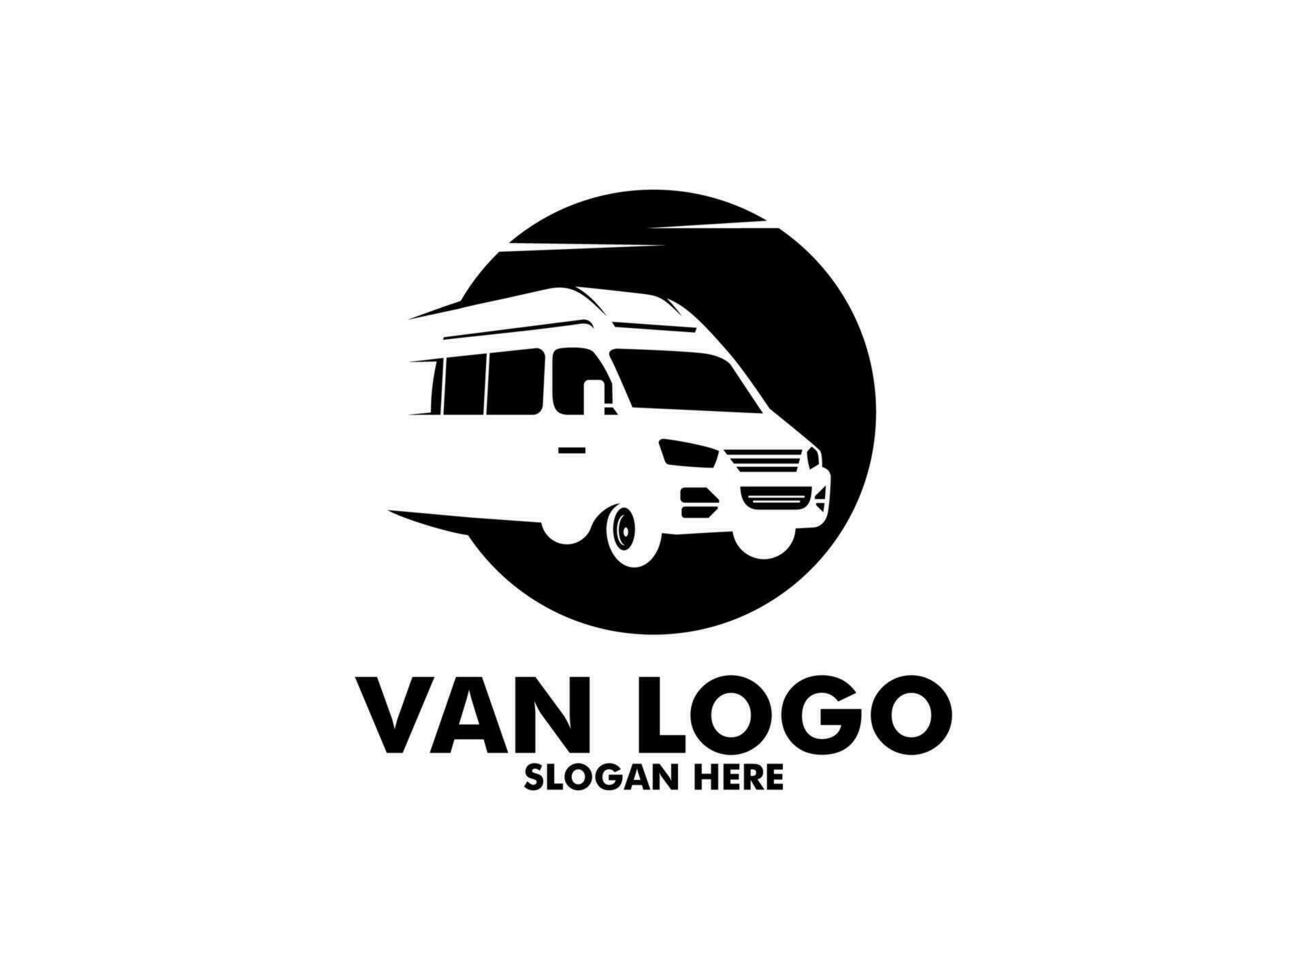 Van logo vector template isolated on white background